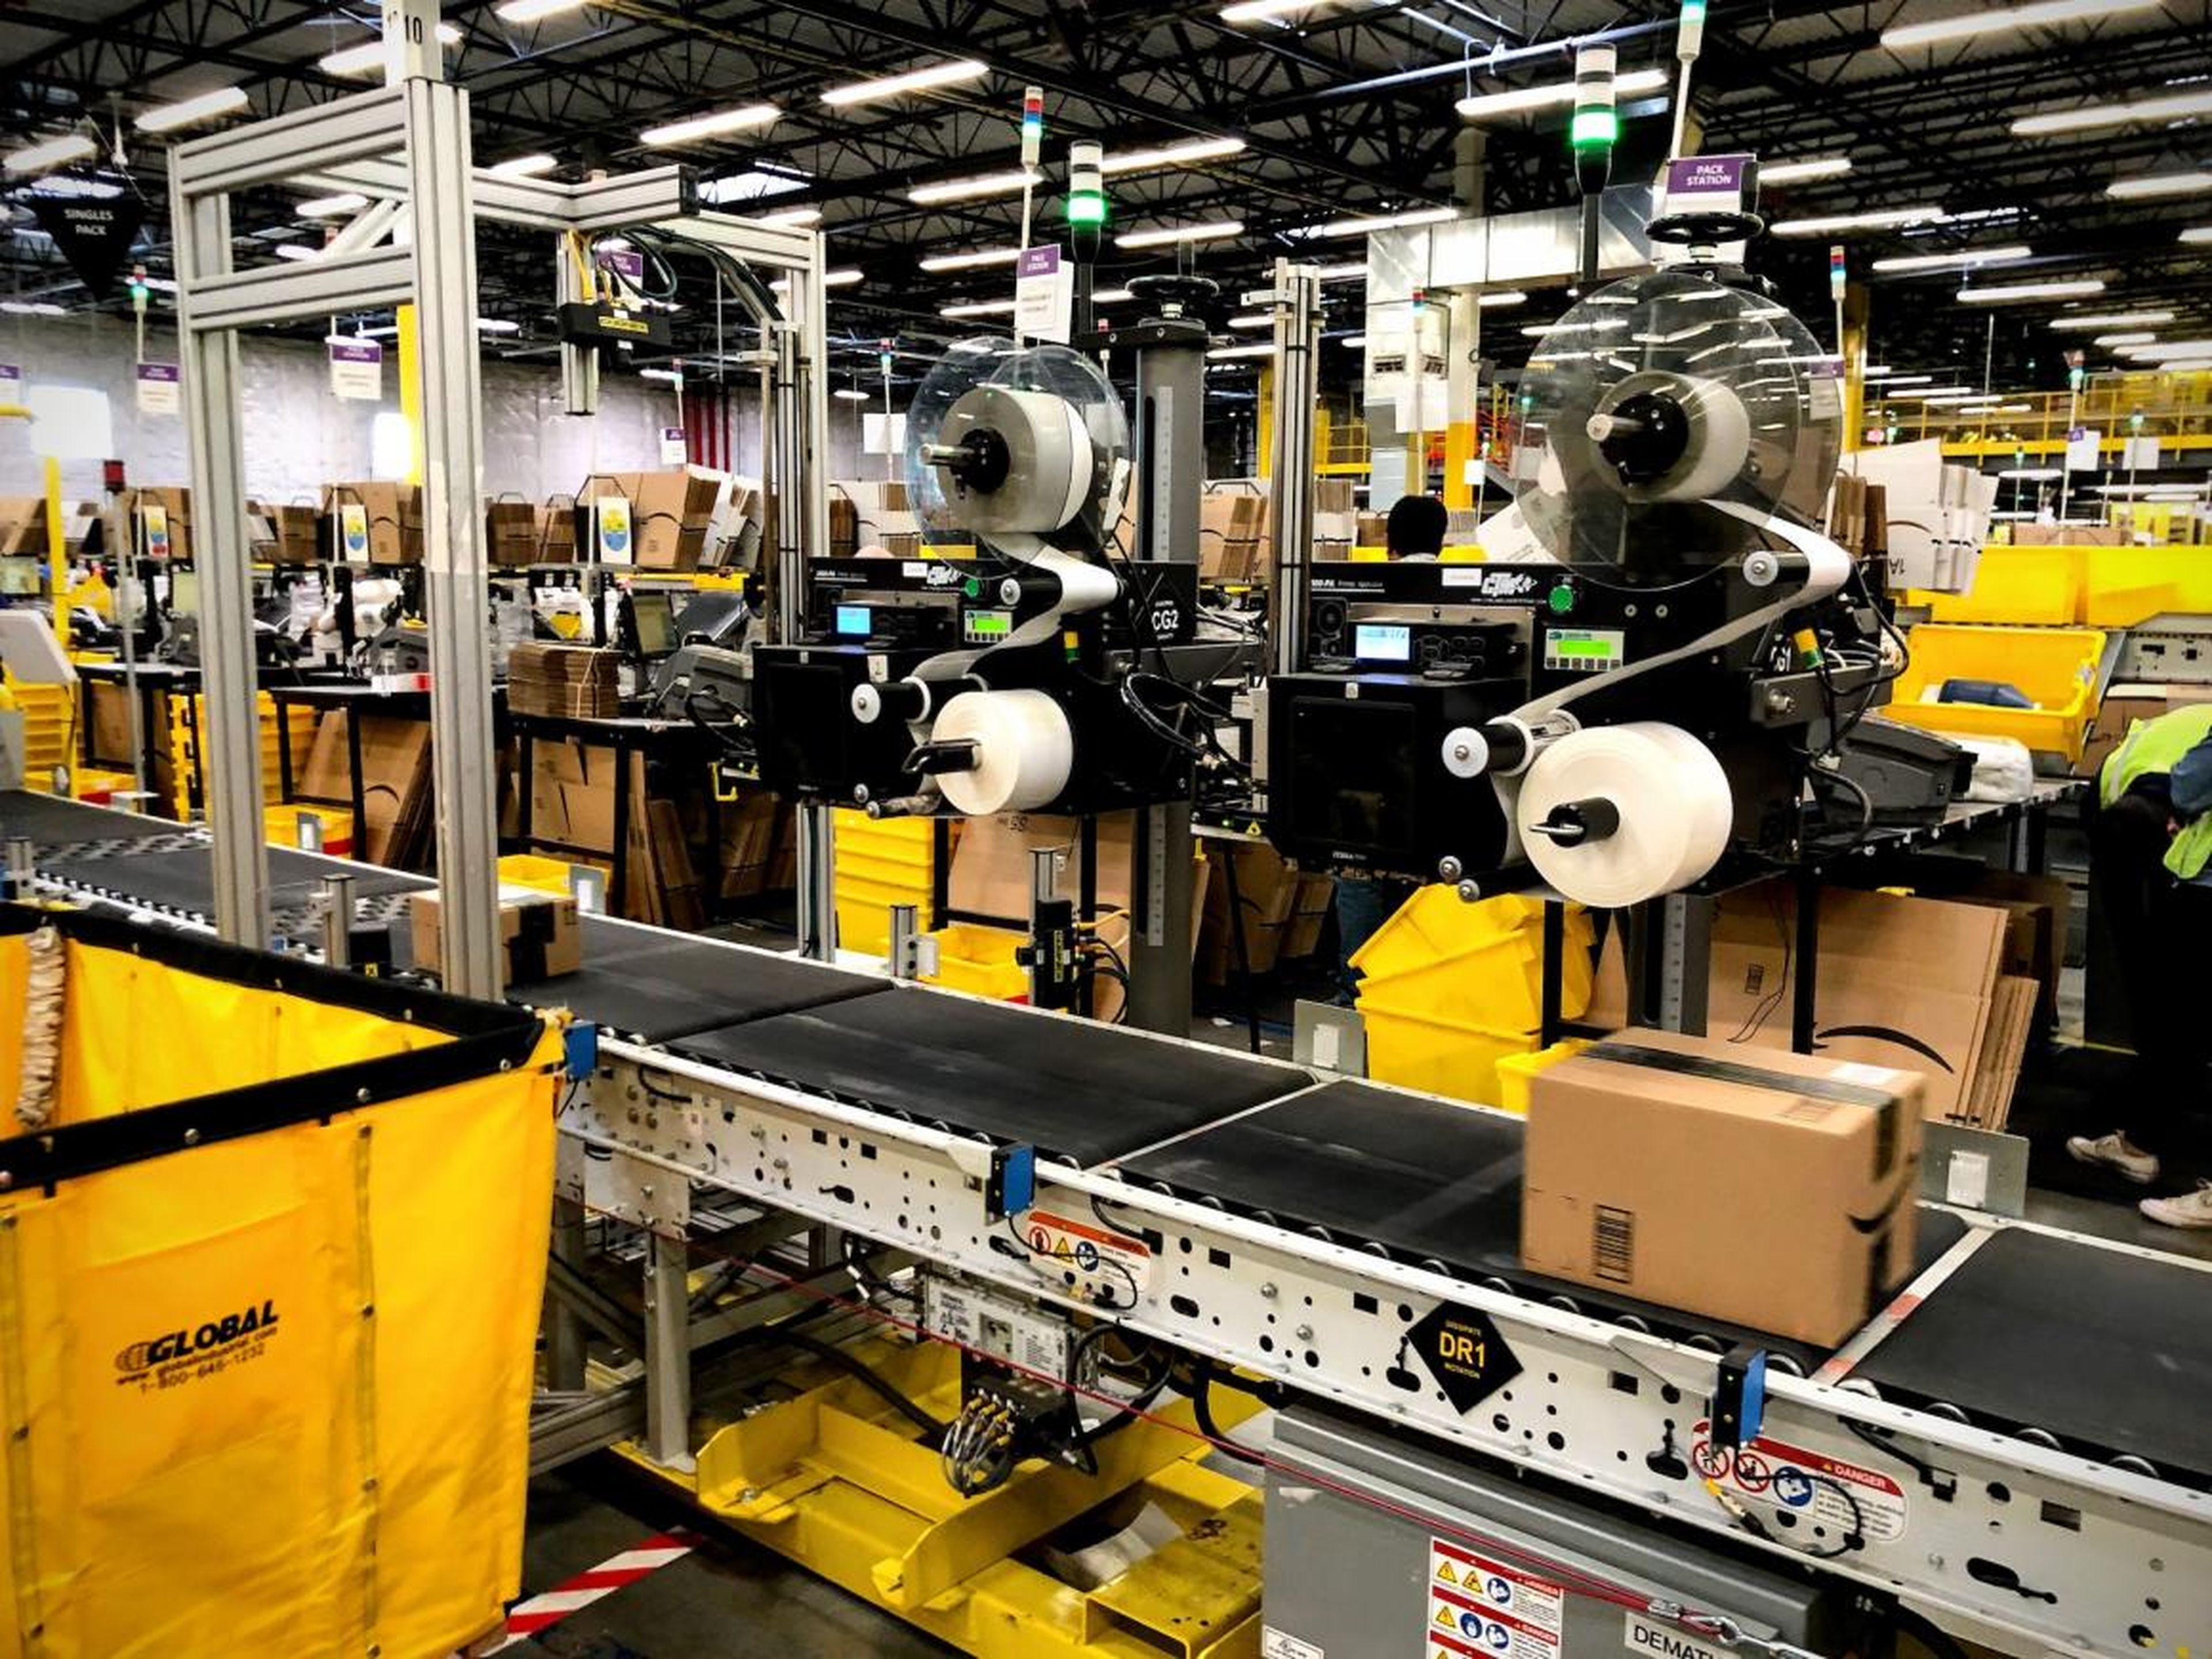 This system is called SLAM, which stands for "scan, label, apply, manifest." Amazon created the process about 20 years ago, during the early years of the company.